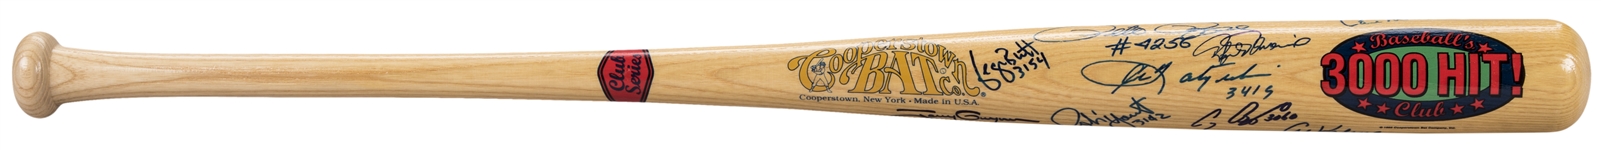 3000 Hit Club Multi Signed Cooperstown Commemorative Bat With 19 Signatures (Beckett)